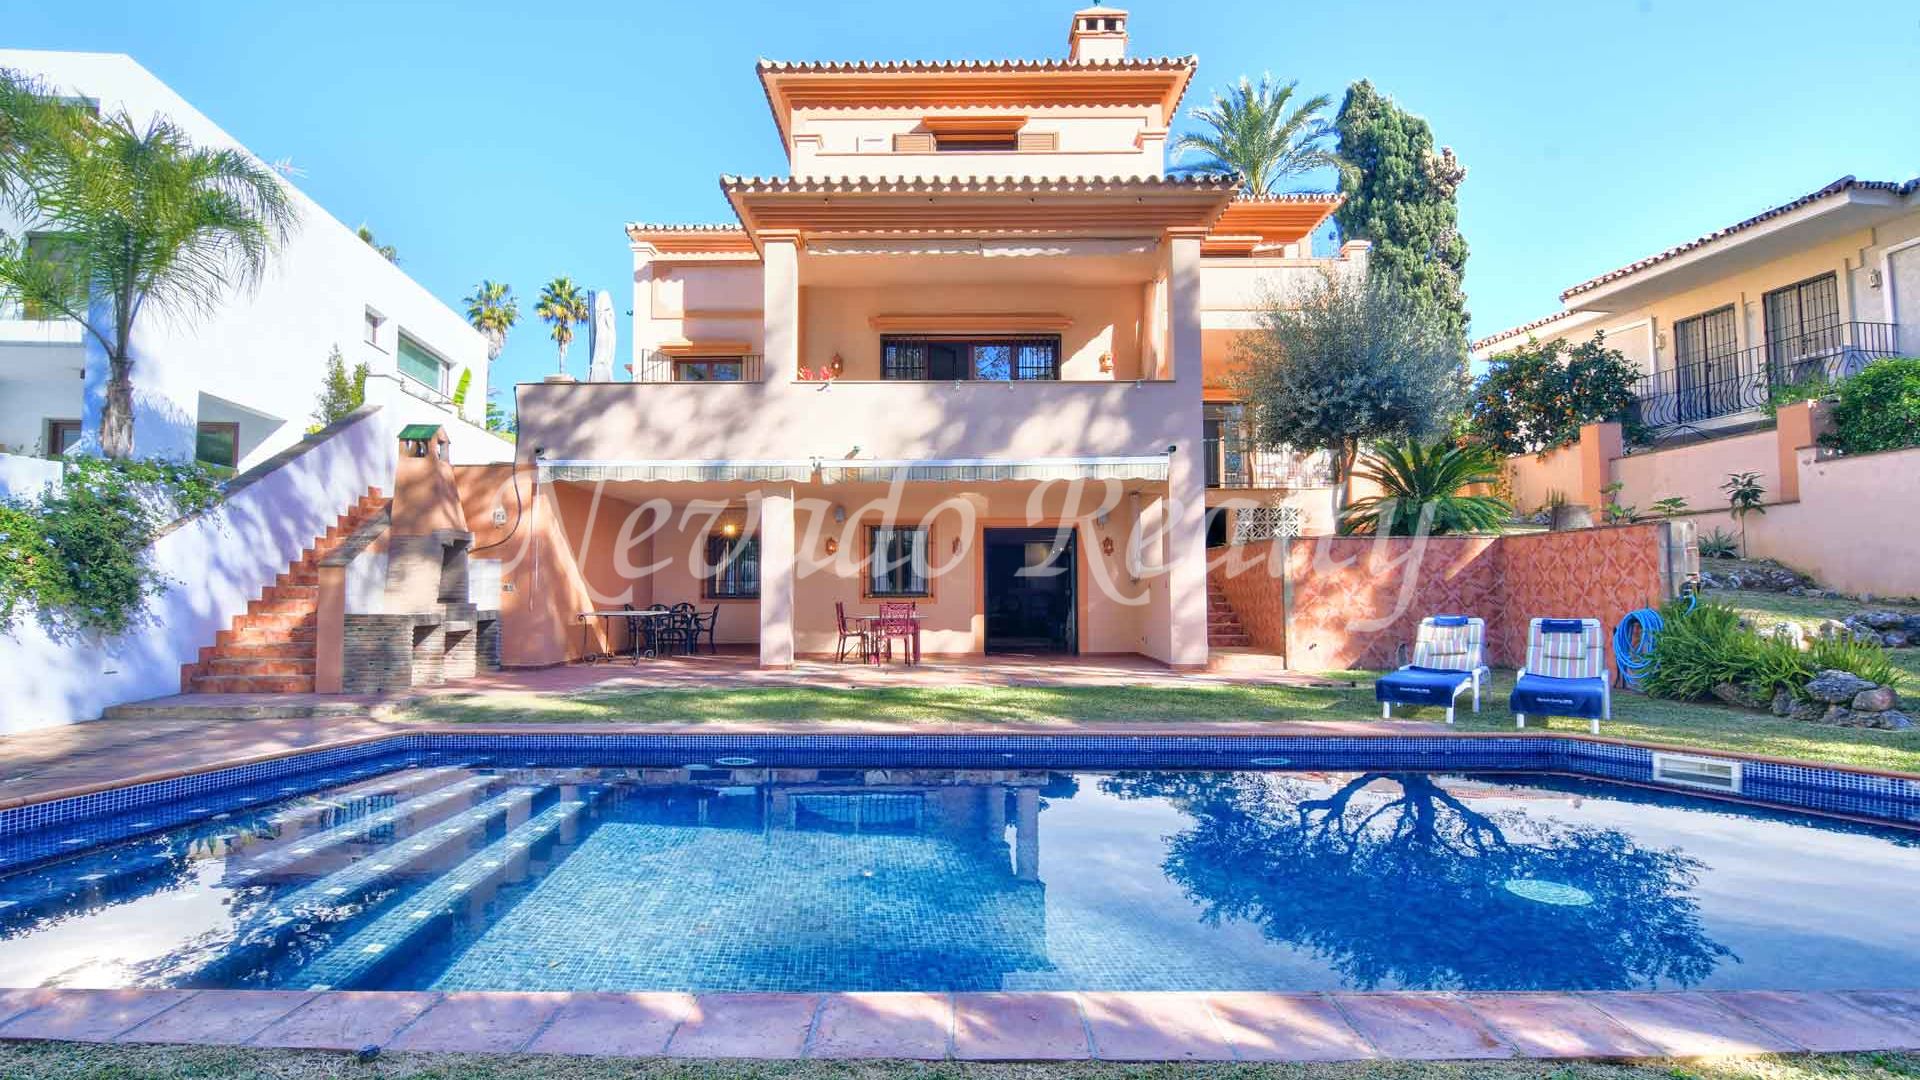 Villa for sale in Marbella located near the beach and the Swans International School